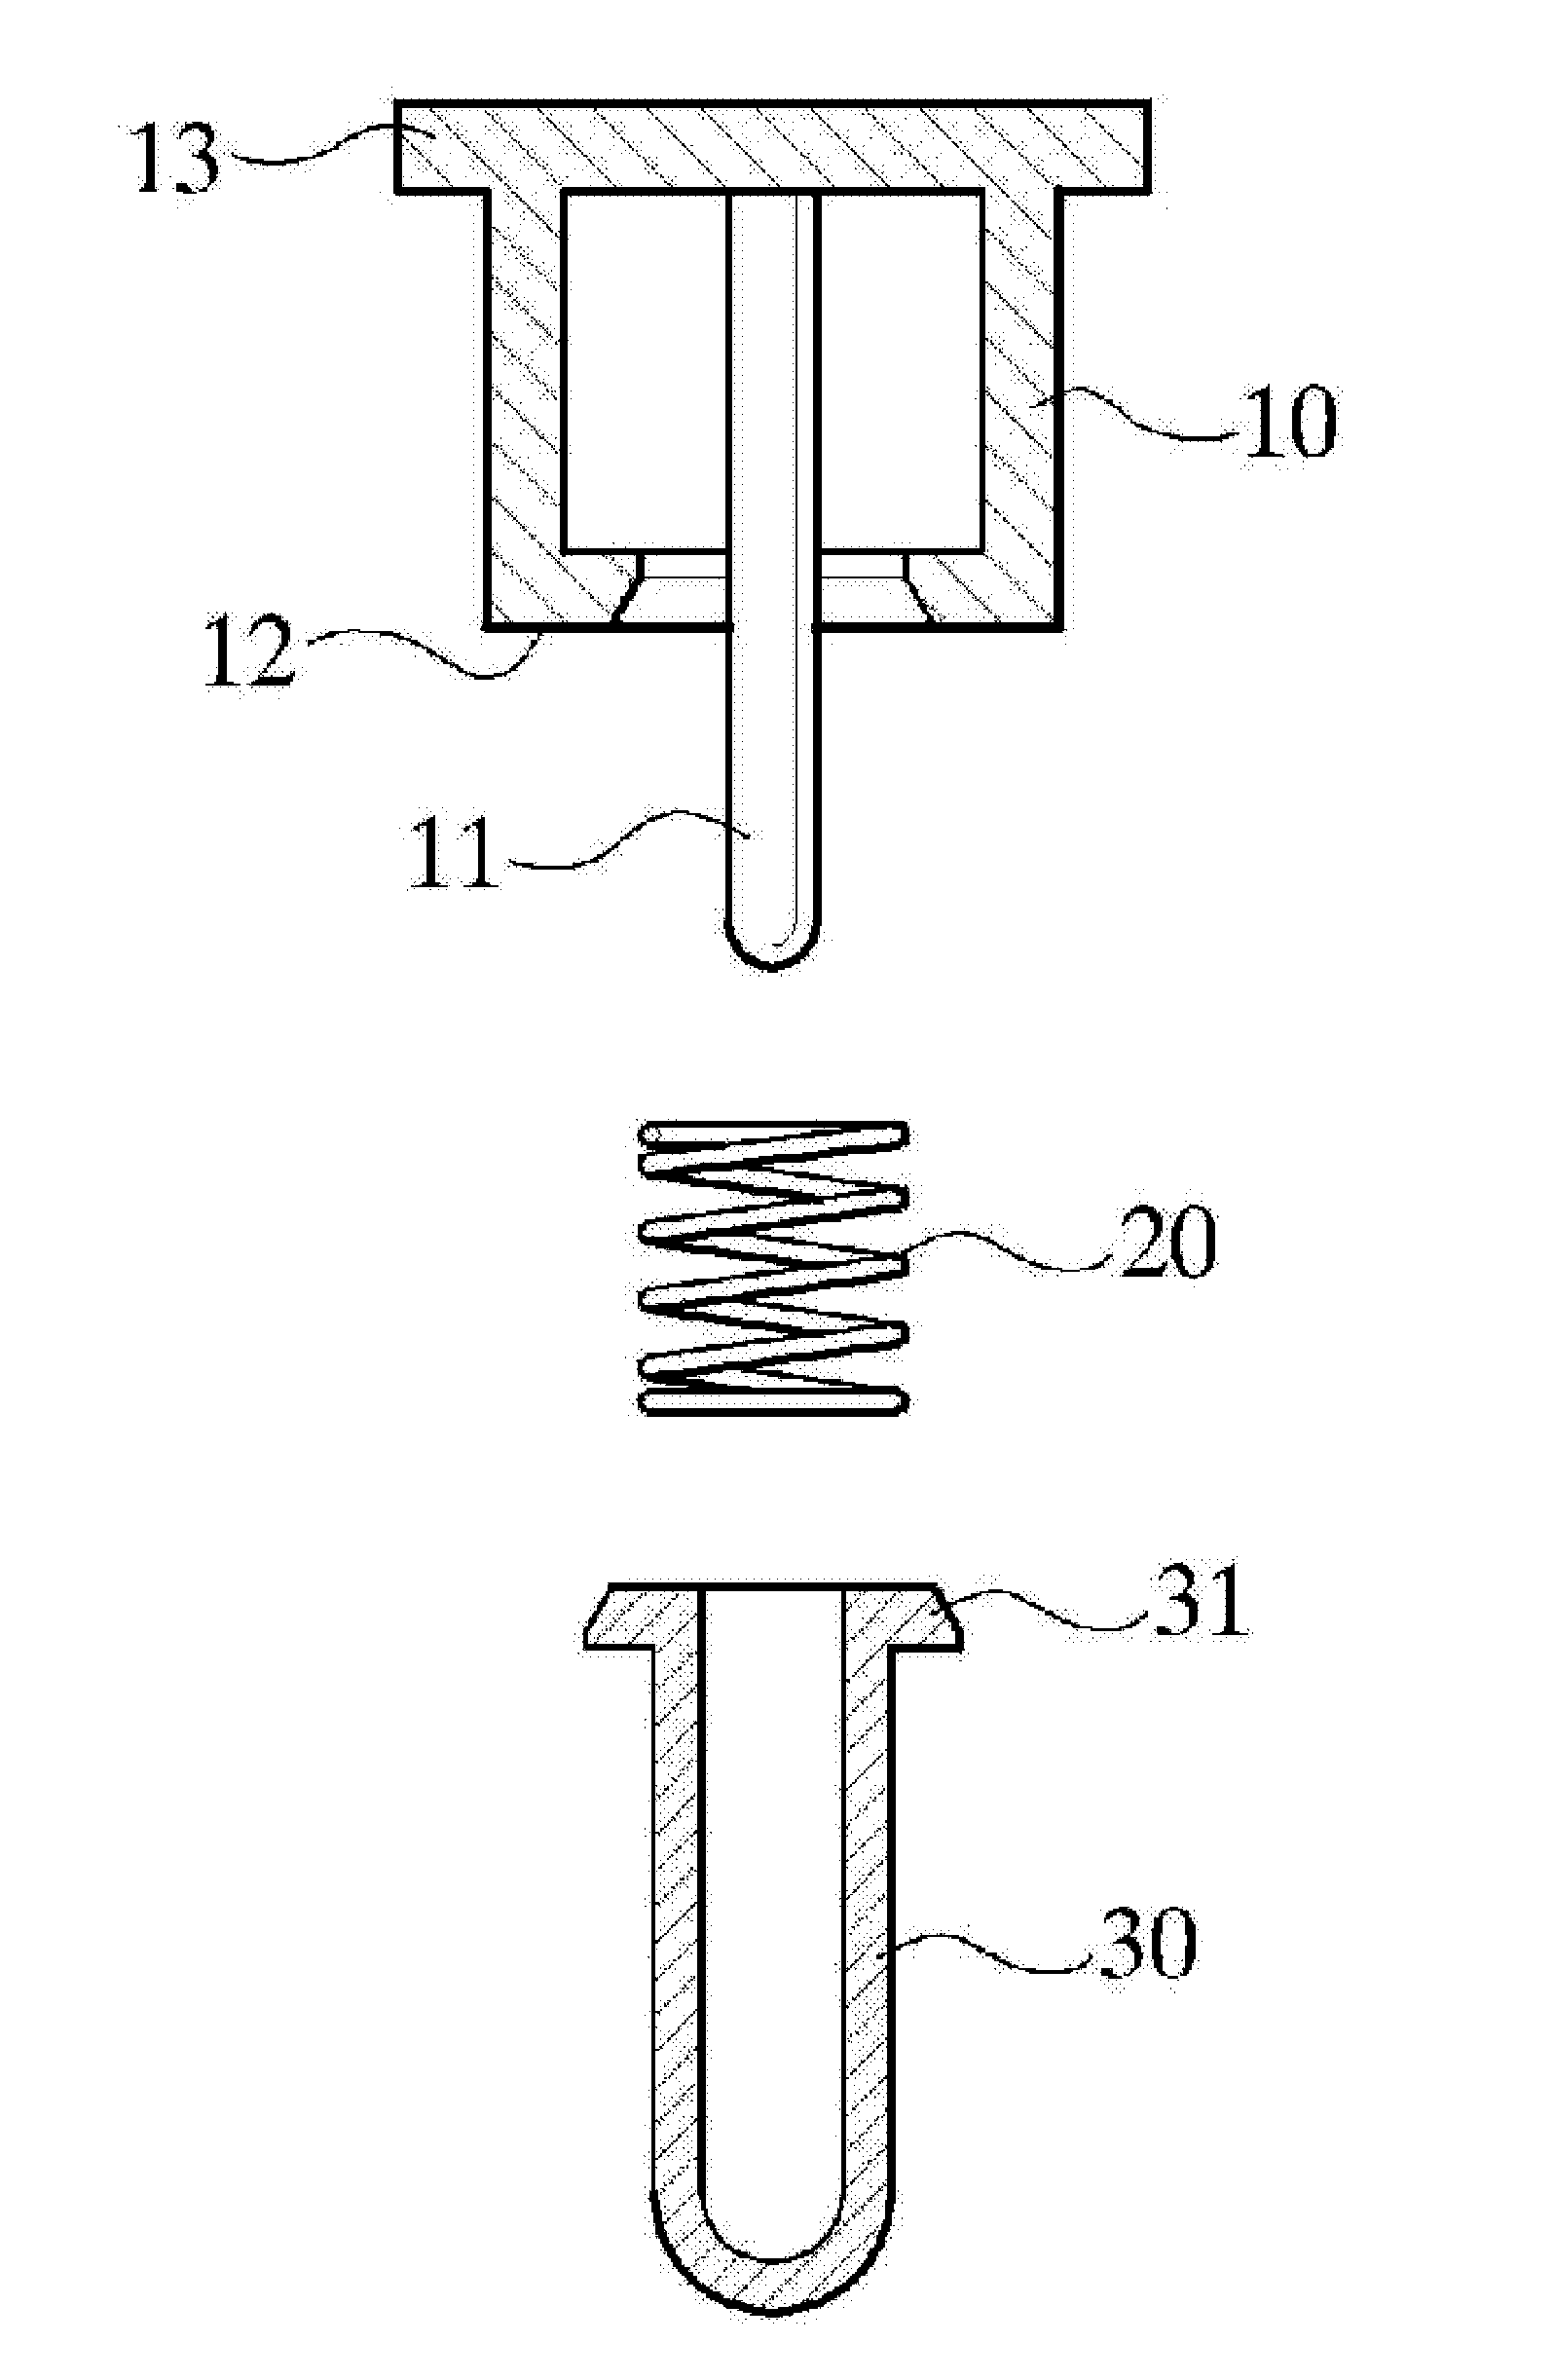 Electrode device for measuring impedance of human body and apparatus comprising the same